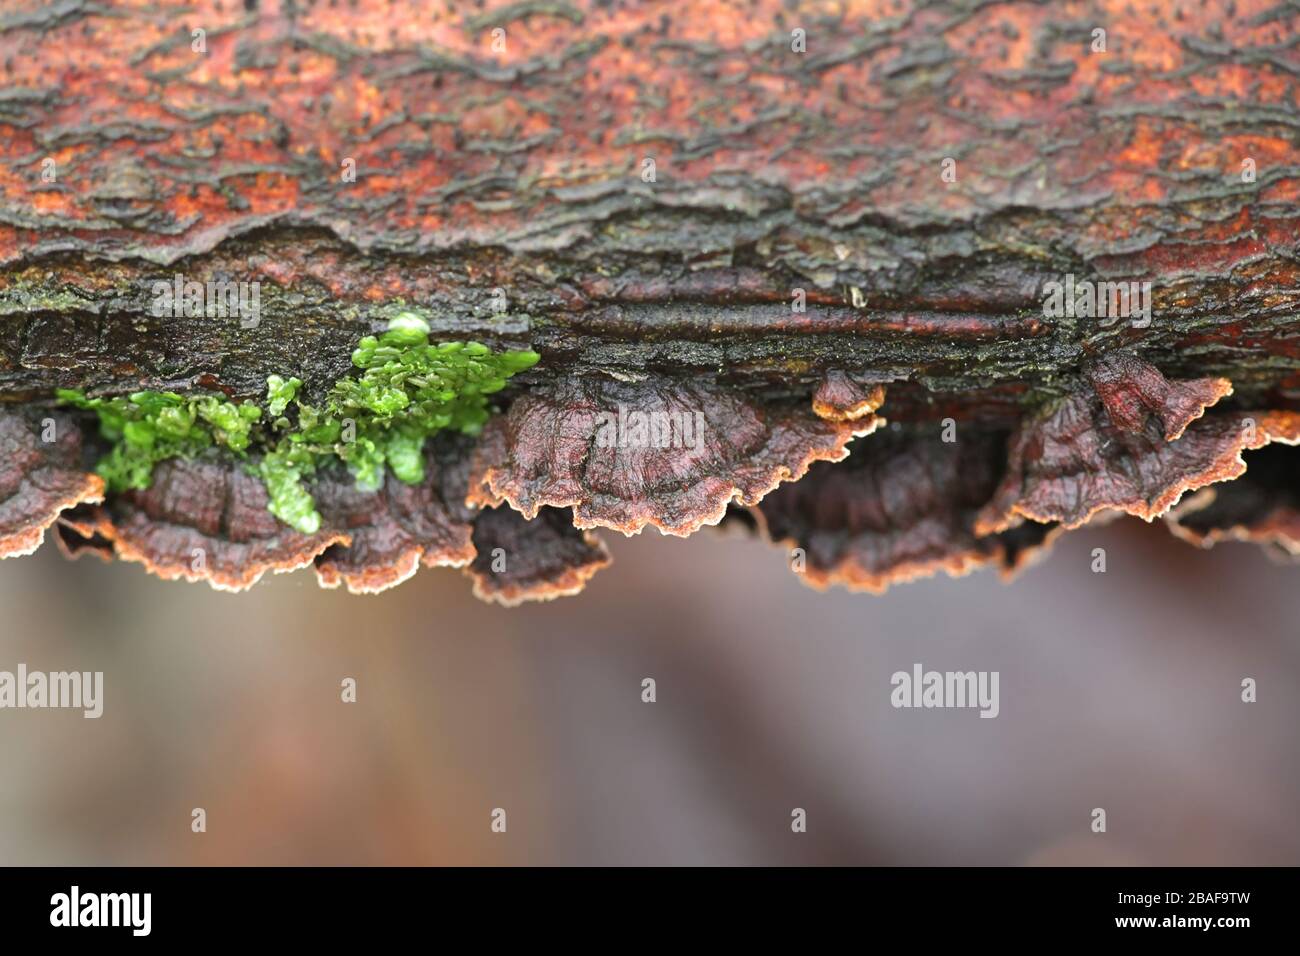 Pseudochaete tabacina, known as willow glue, crust fungus from Finland Stock Photo